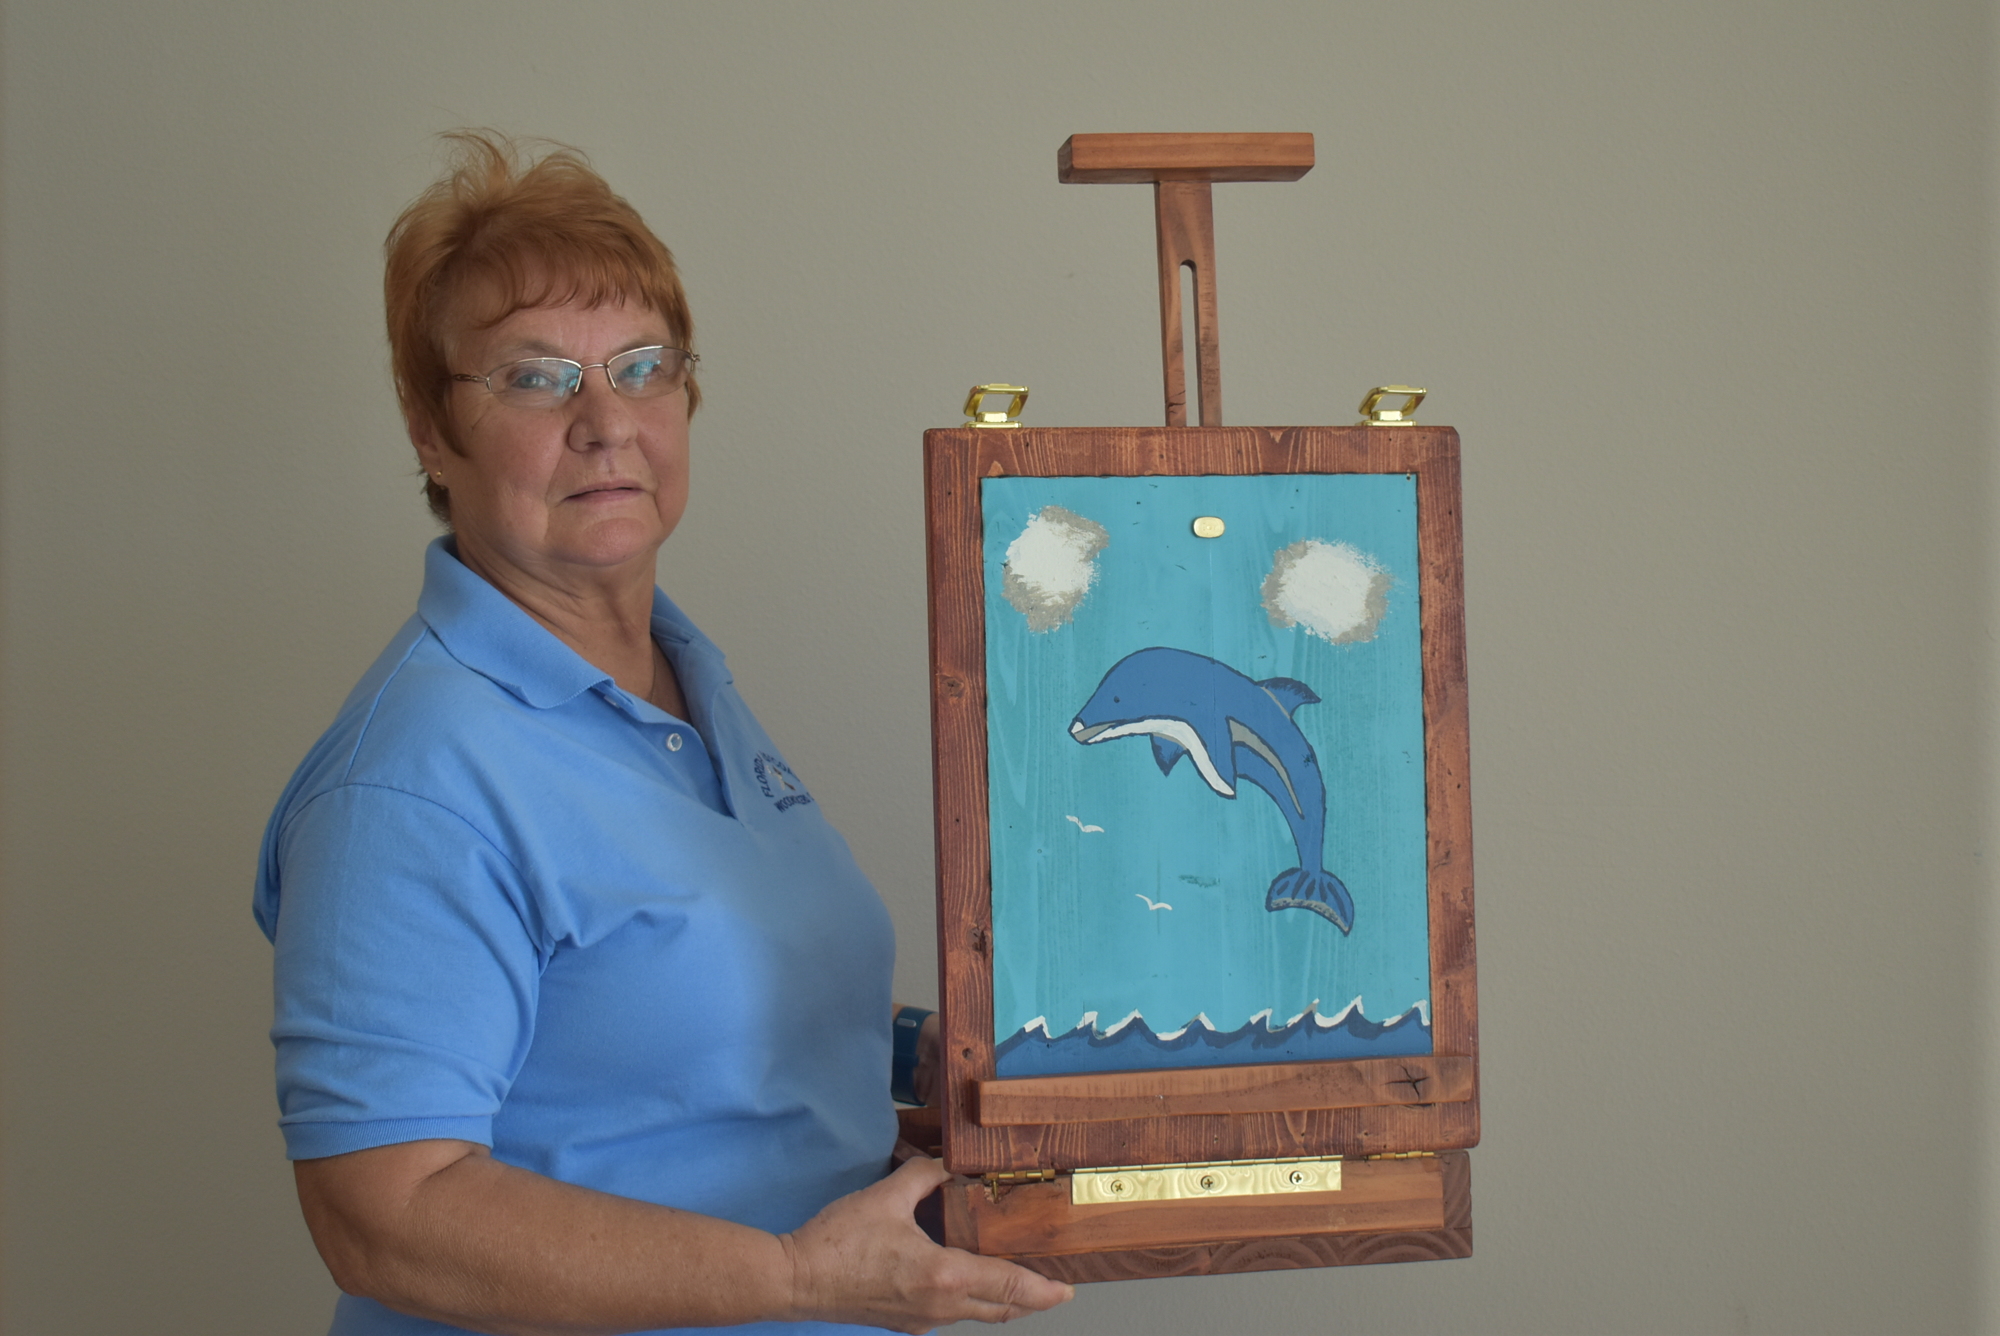 Whisper Bend resident Barbara Brown, who considers herself a novice, made this project from exactly one 2x4 piece of wood. It is an art supplies drawer with an easel cover and a painting of her own making.